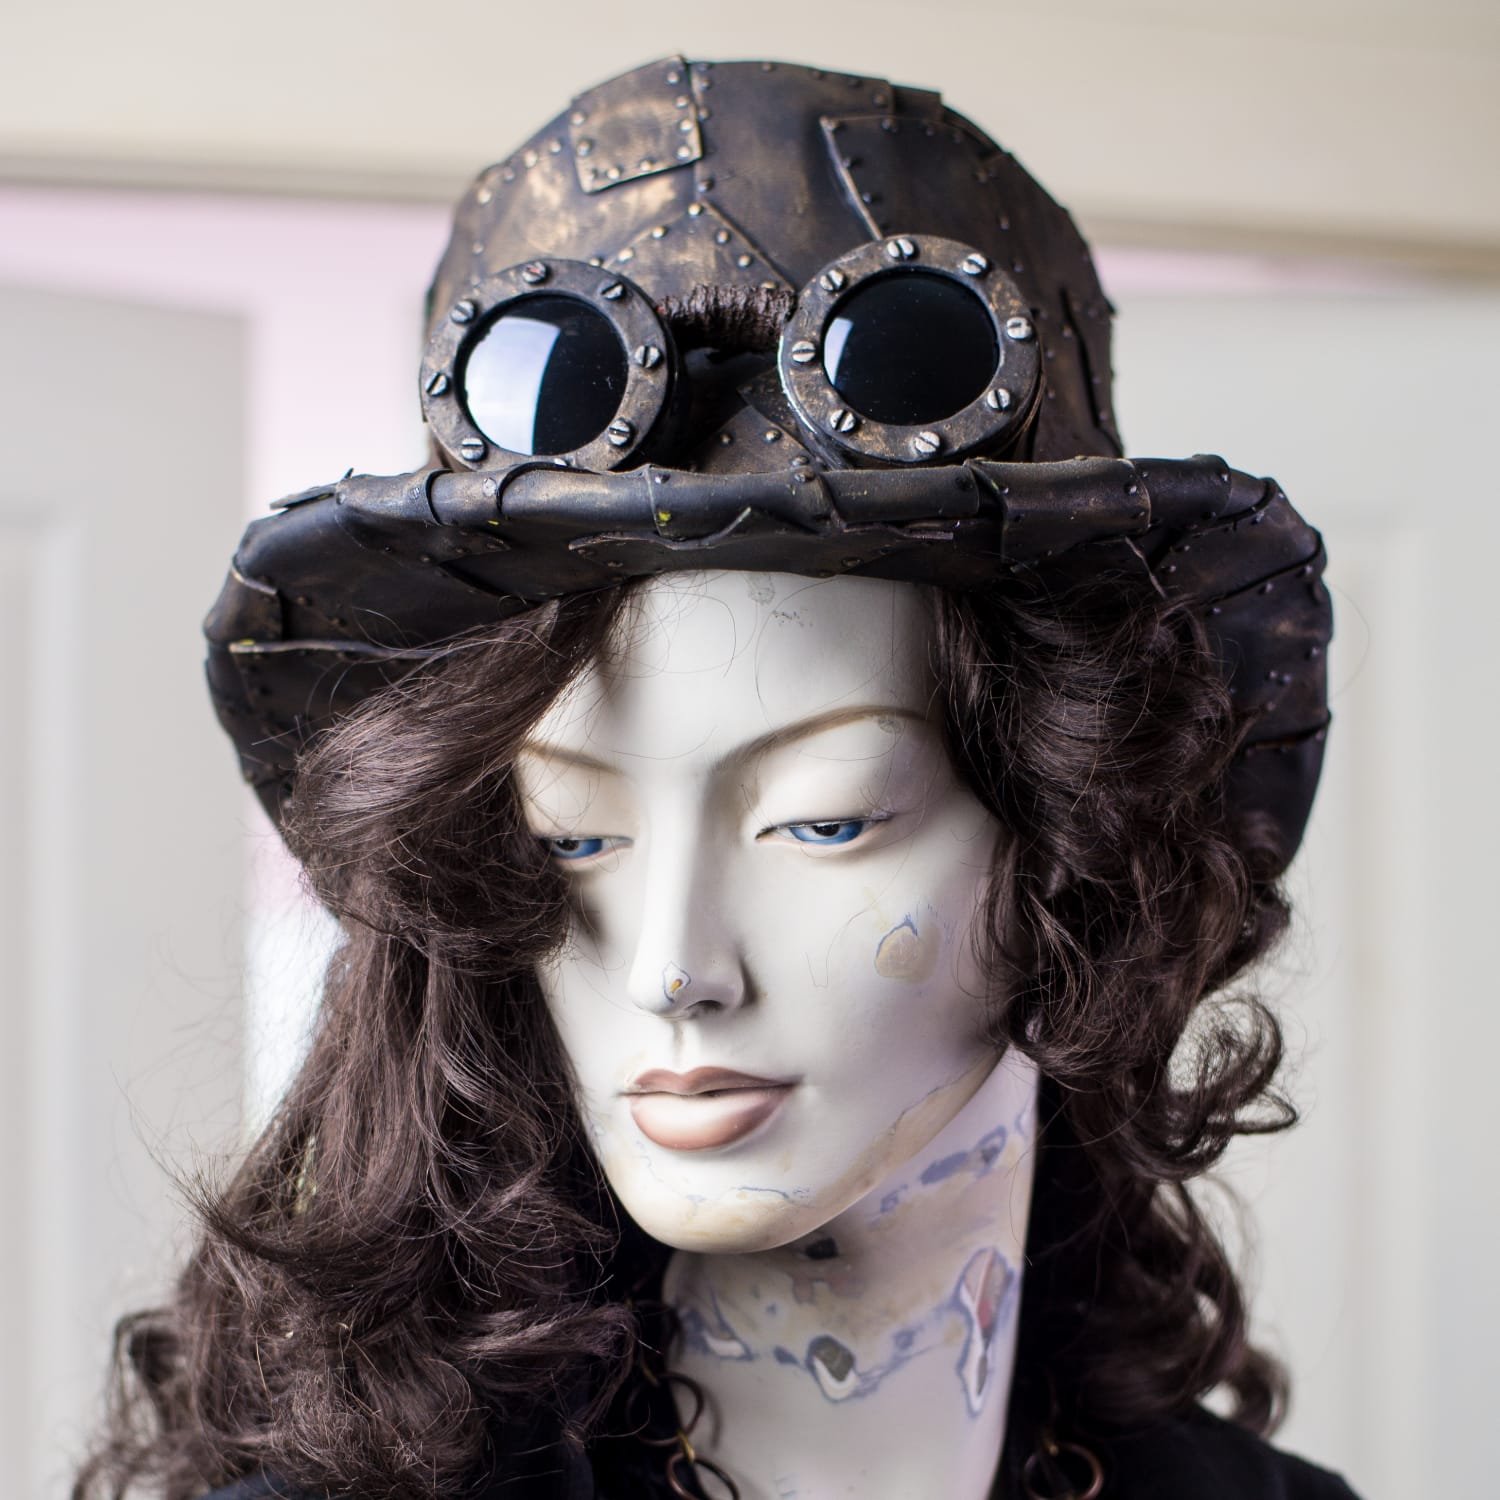 10 Amazing Steampunk Costume Ideas and accessories made from foam! — Lost  Wax